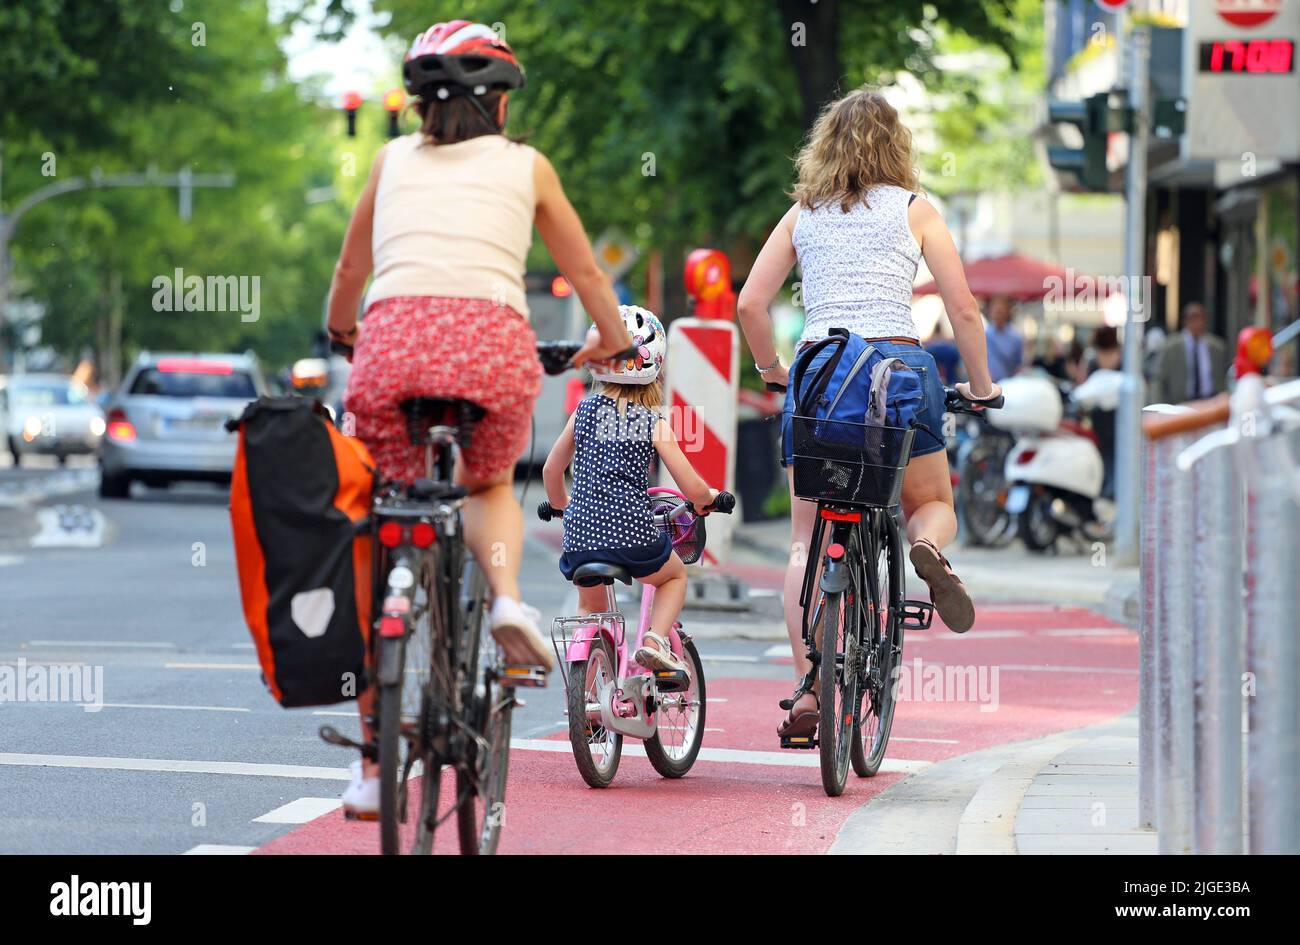 mother with little daughter on bike lane Stock Photo